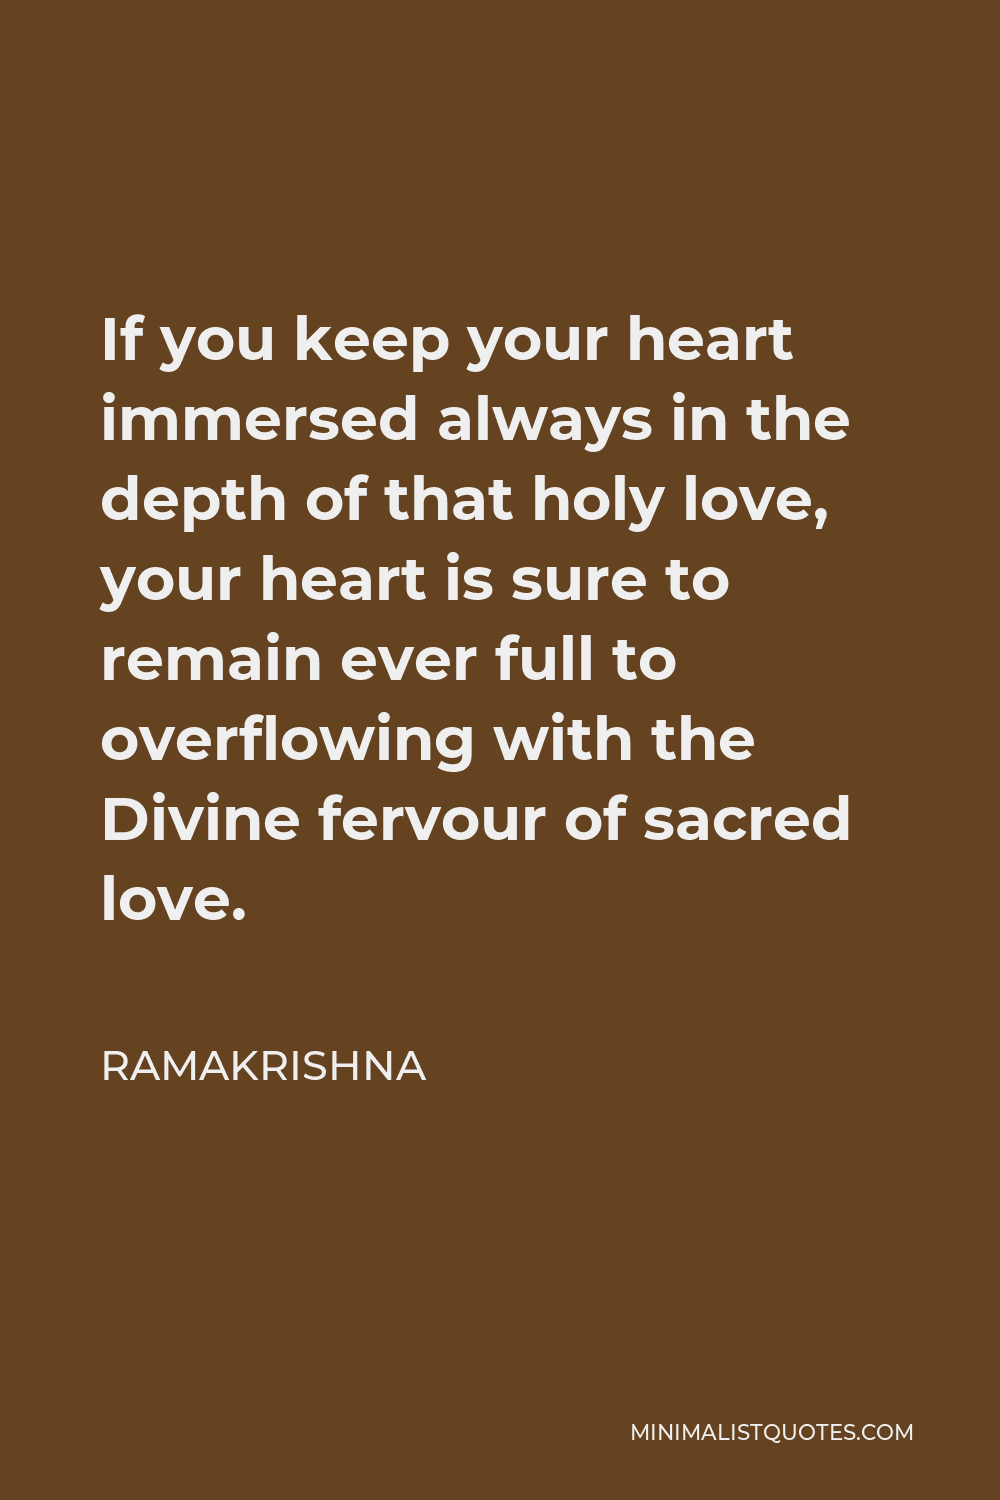 Ramakrishna Quote - If you keep your heart immersed always in the depth of that holy love, your heart is sure to remain ever full to overflowing with the Divine fervour of sacred love.